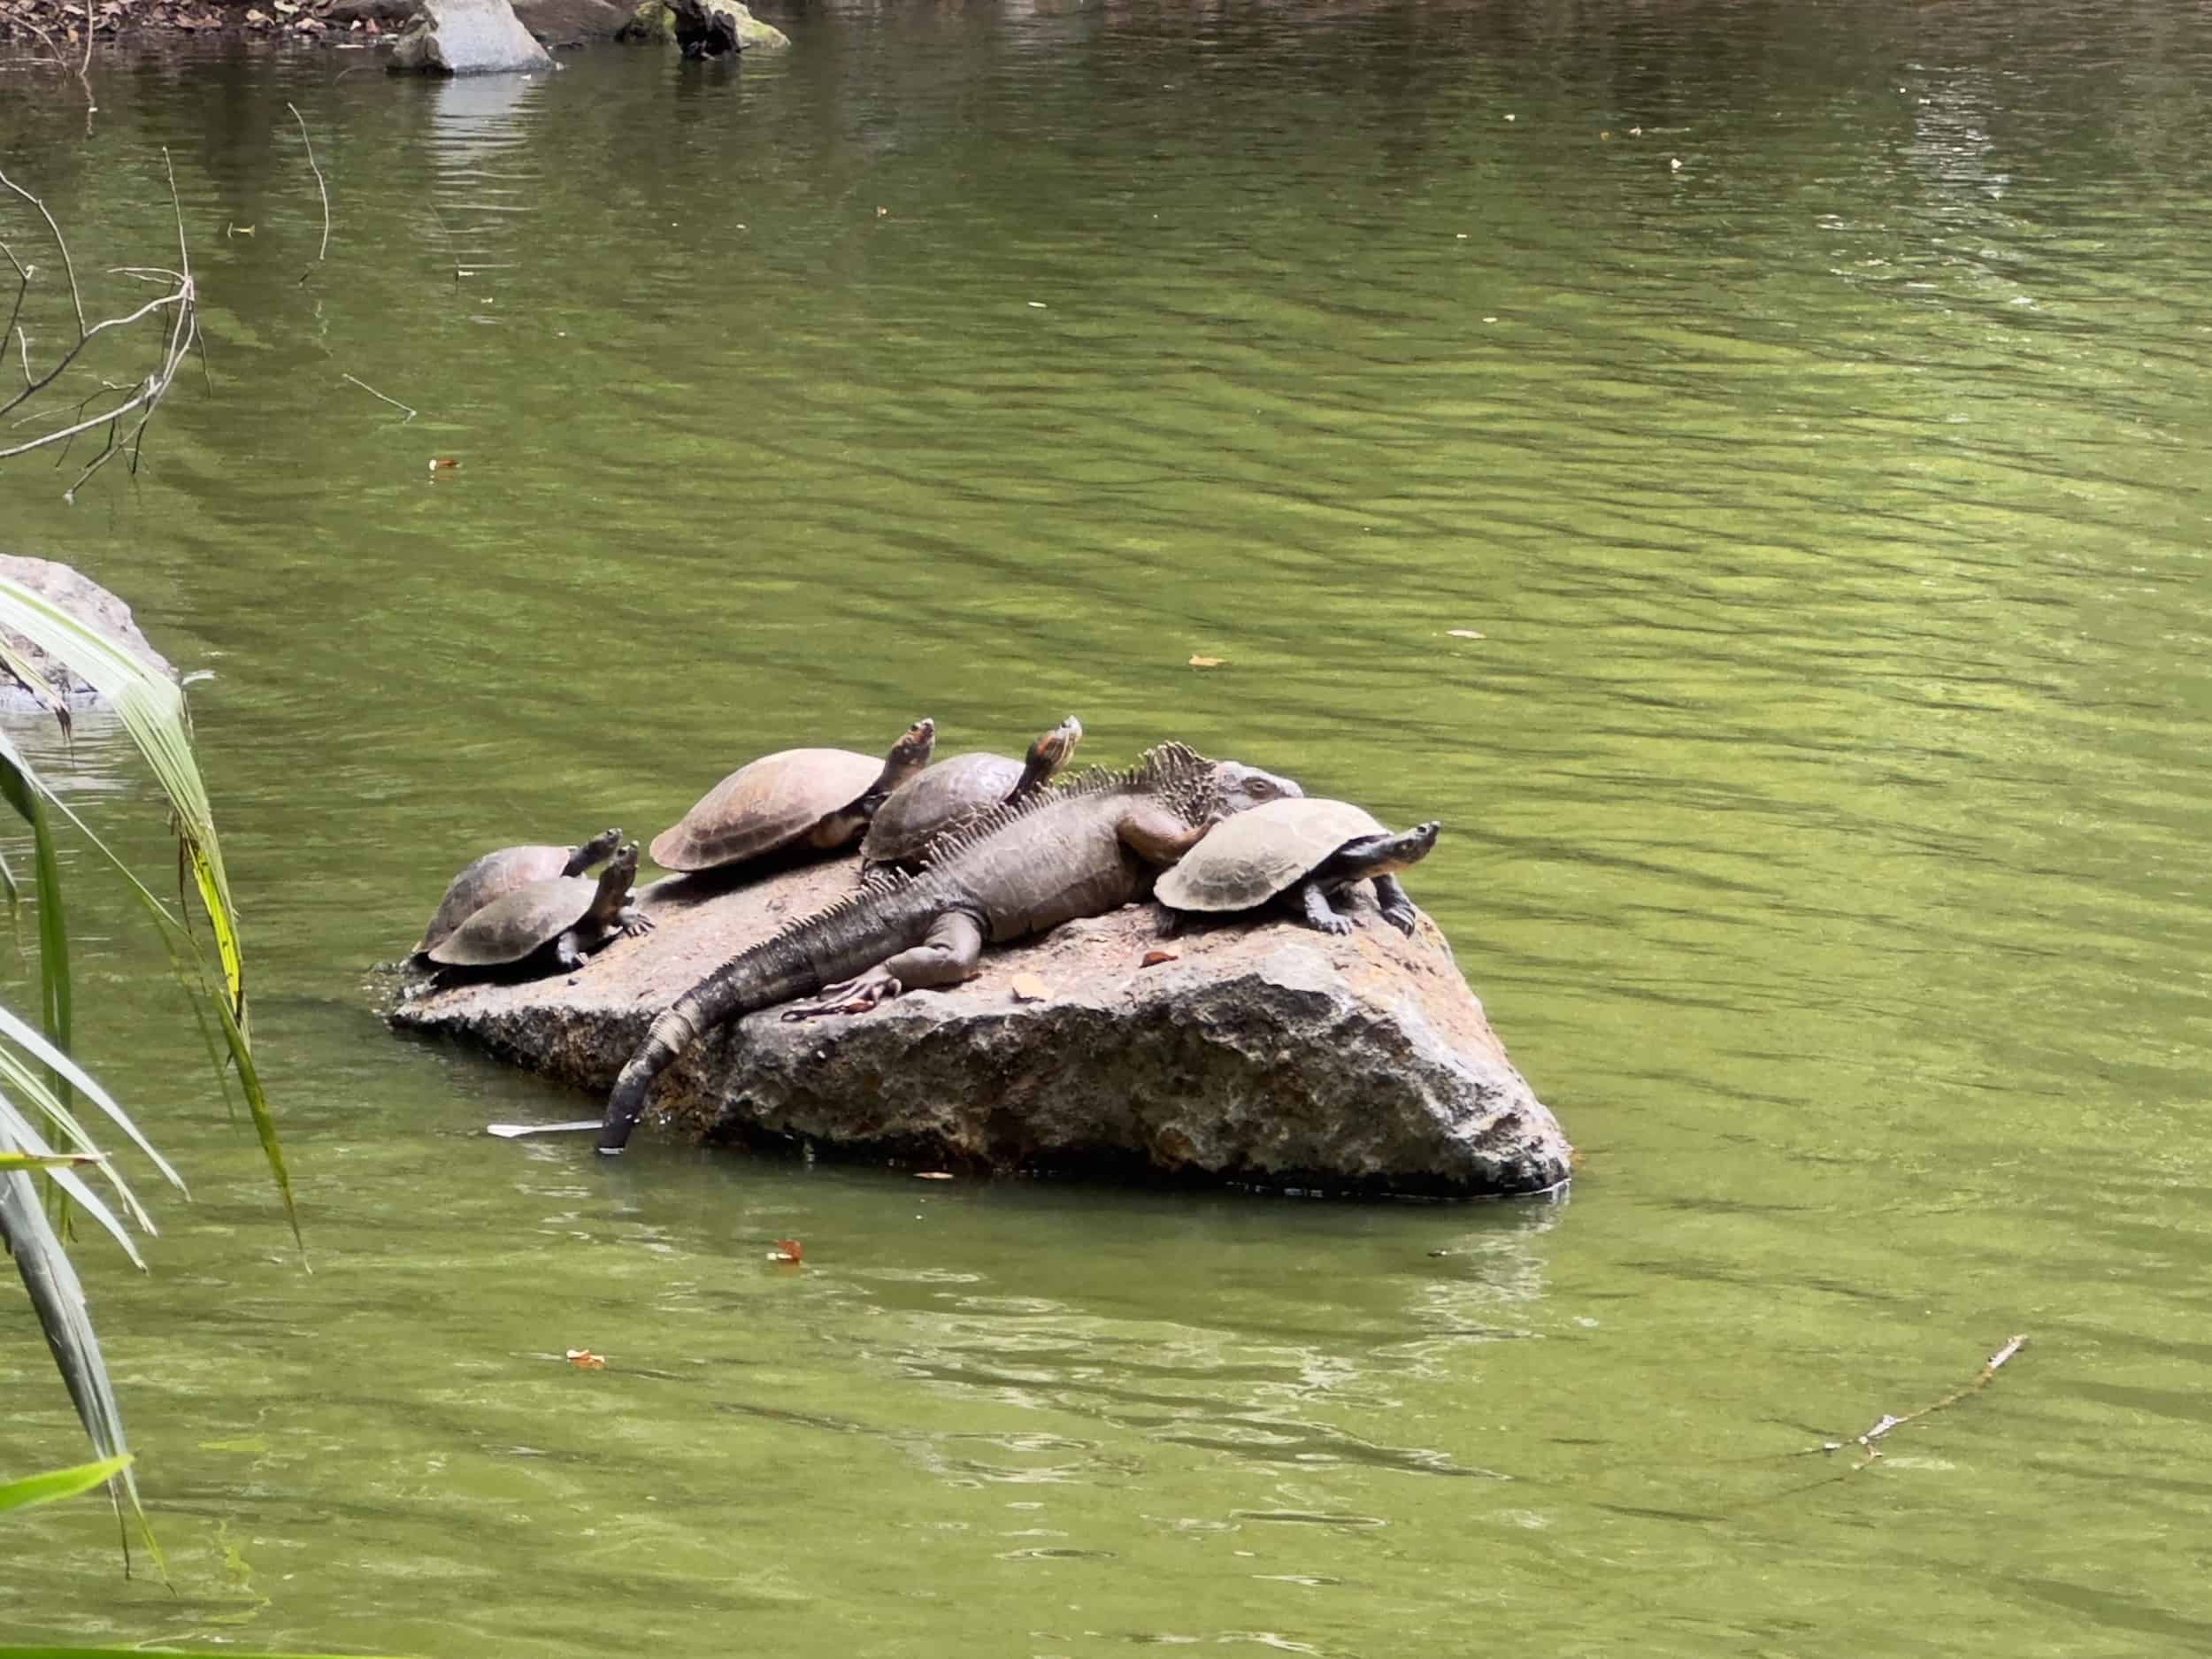 Turtles and an iguana resting on a rock at the Lagoon at the Medellín Botanical Garden in Medellín, Antioquia, Colombia